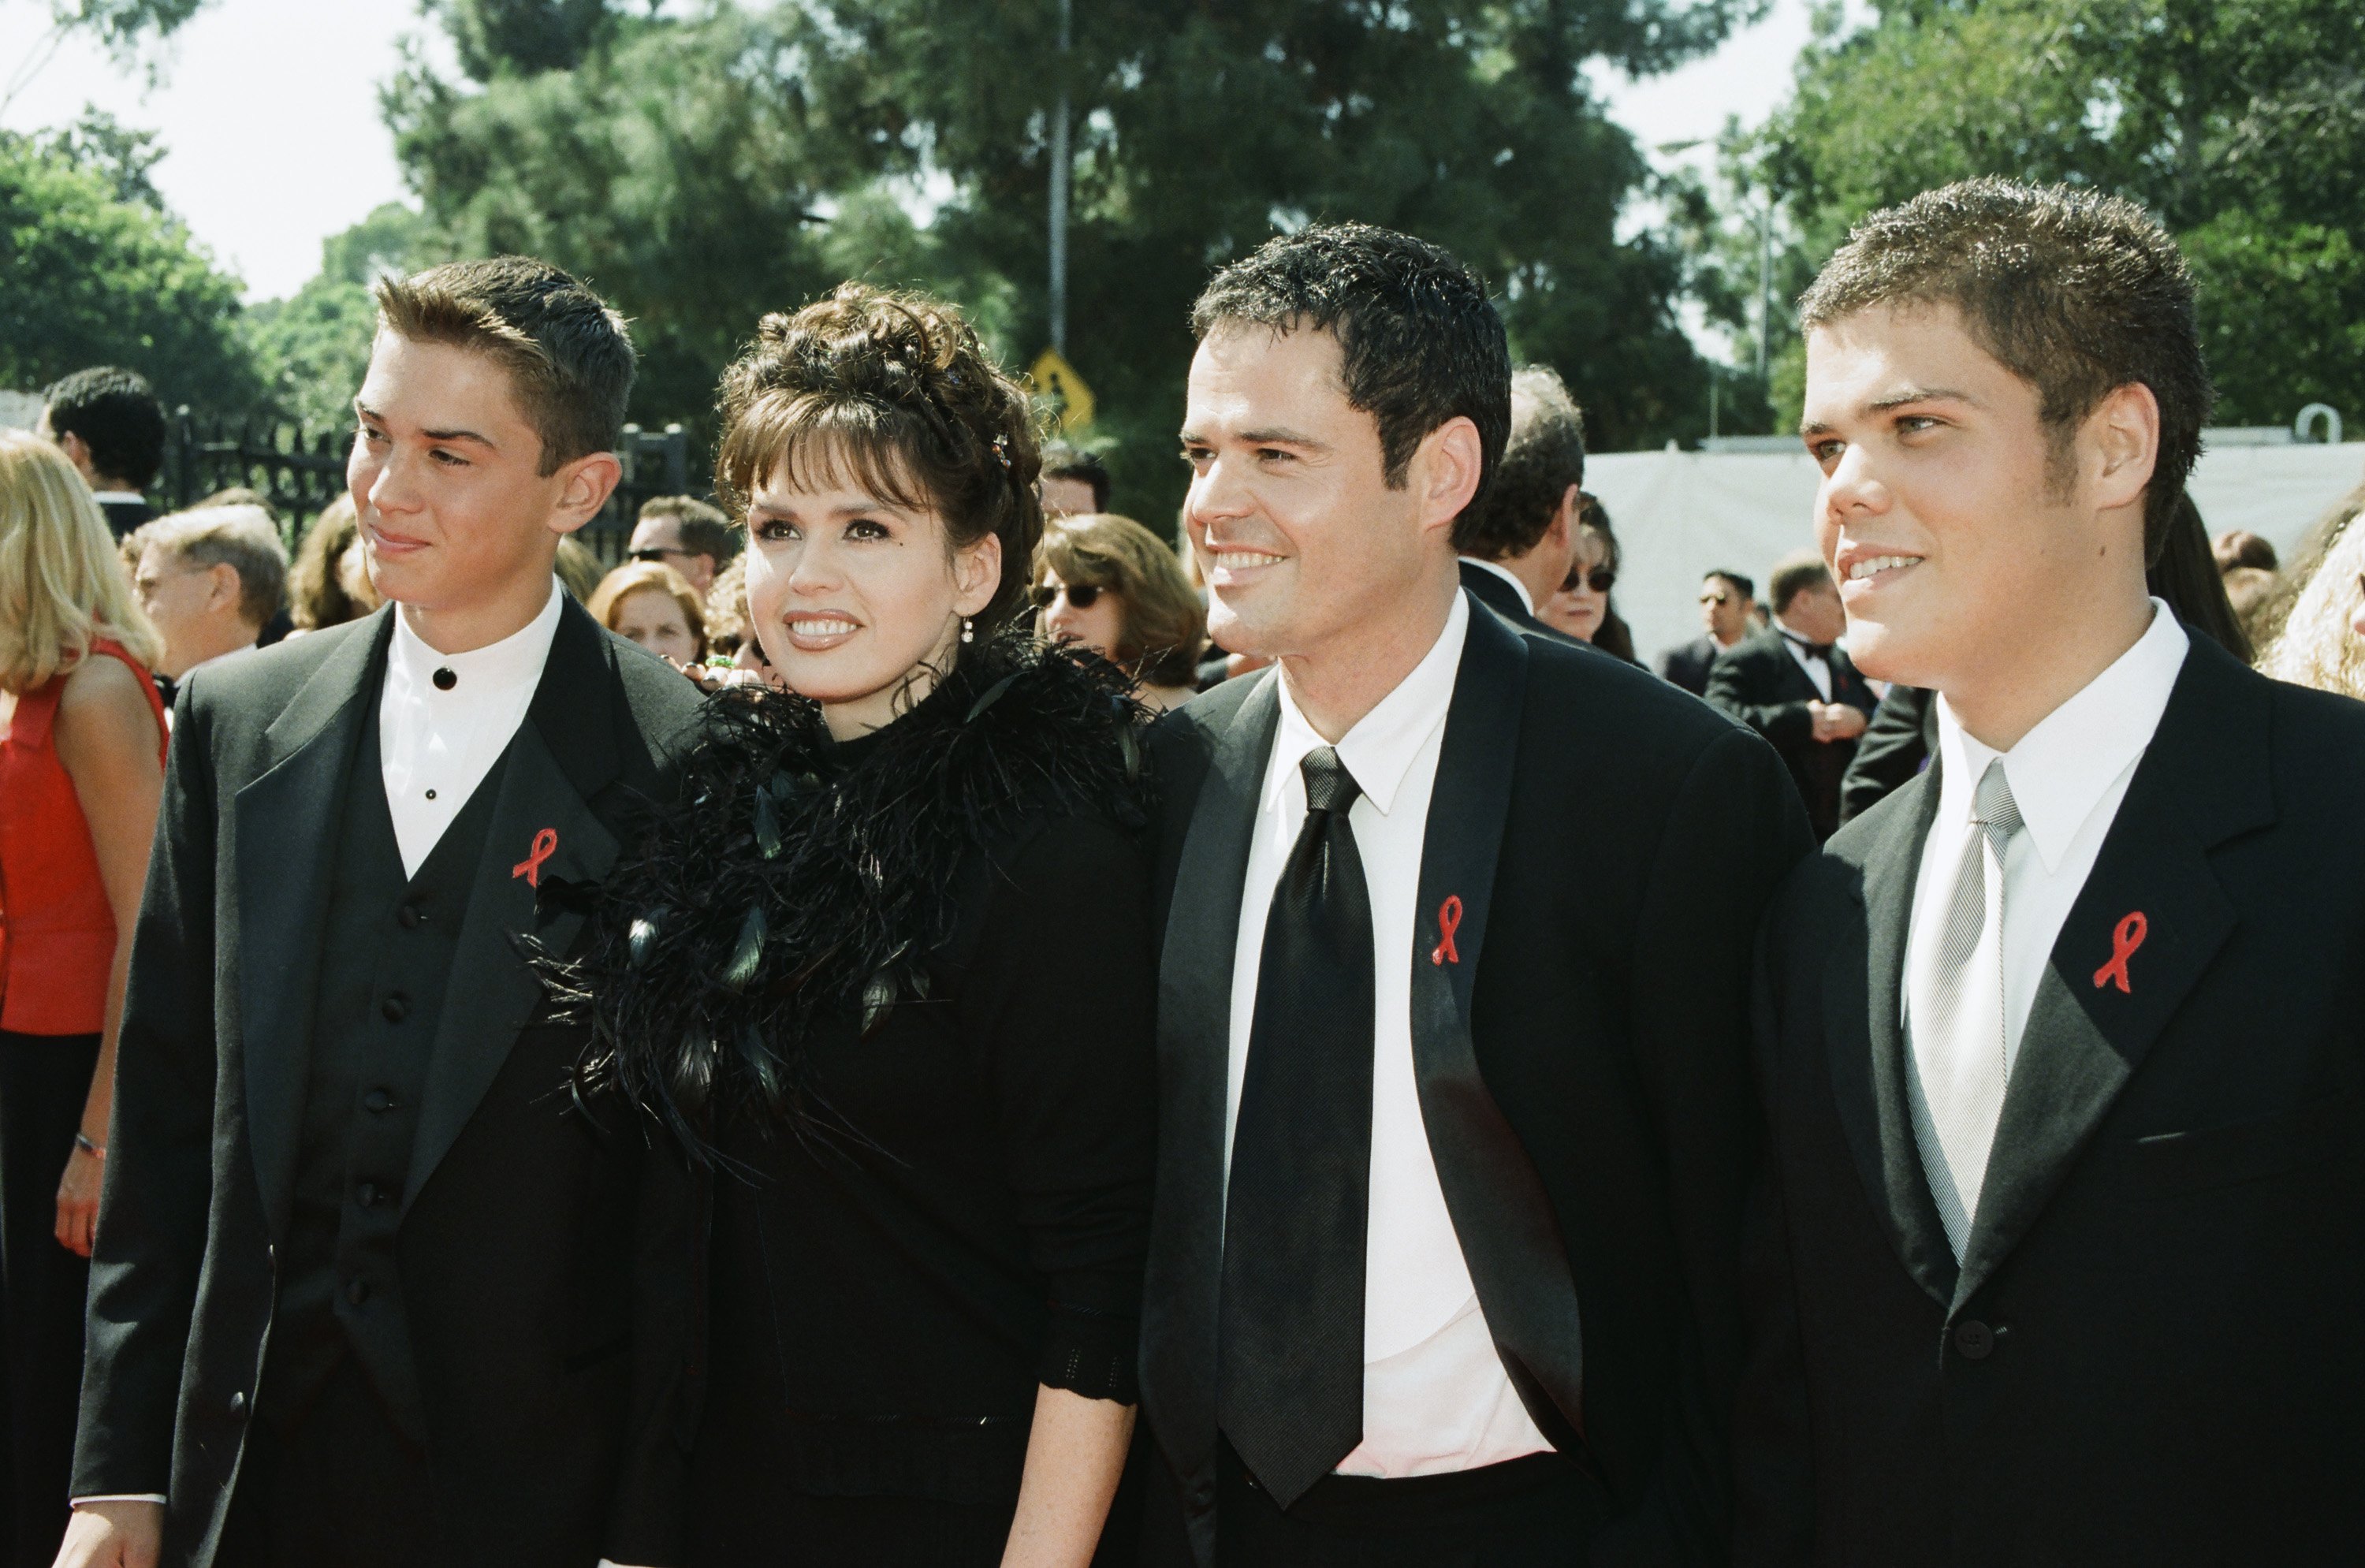 Marie Osmond with sons  Michael Blosil [Far Left], Brandon Osmond [Far Right] and brother Donny Osmond at the Shrine Auditorium in Los Angeles, CA on September 13, 1998 | Source: Getty Images